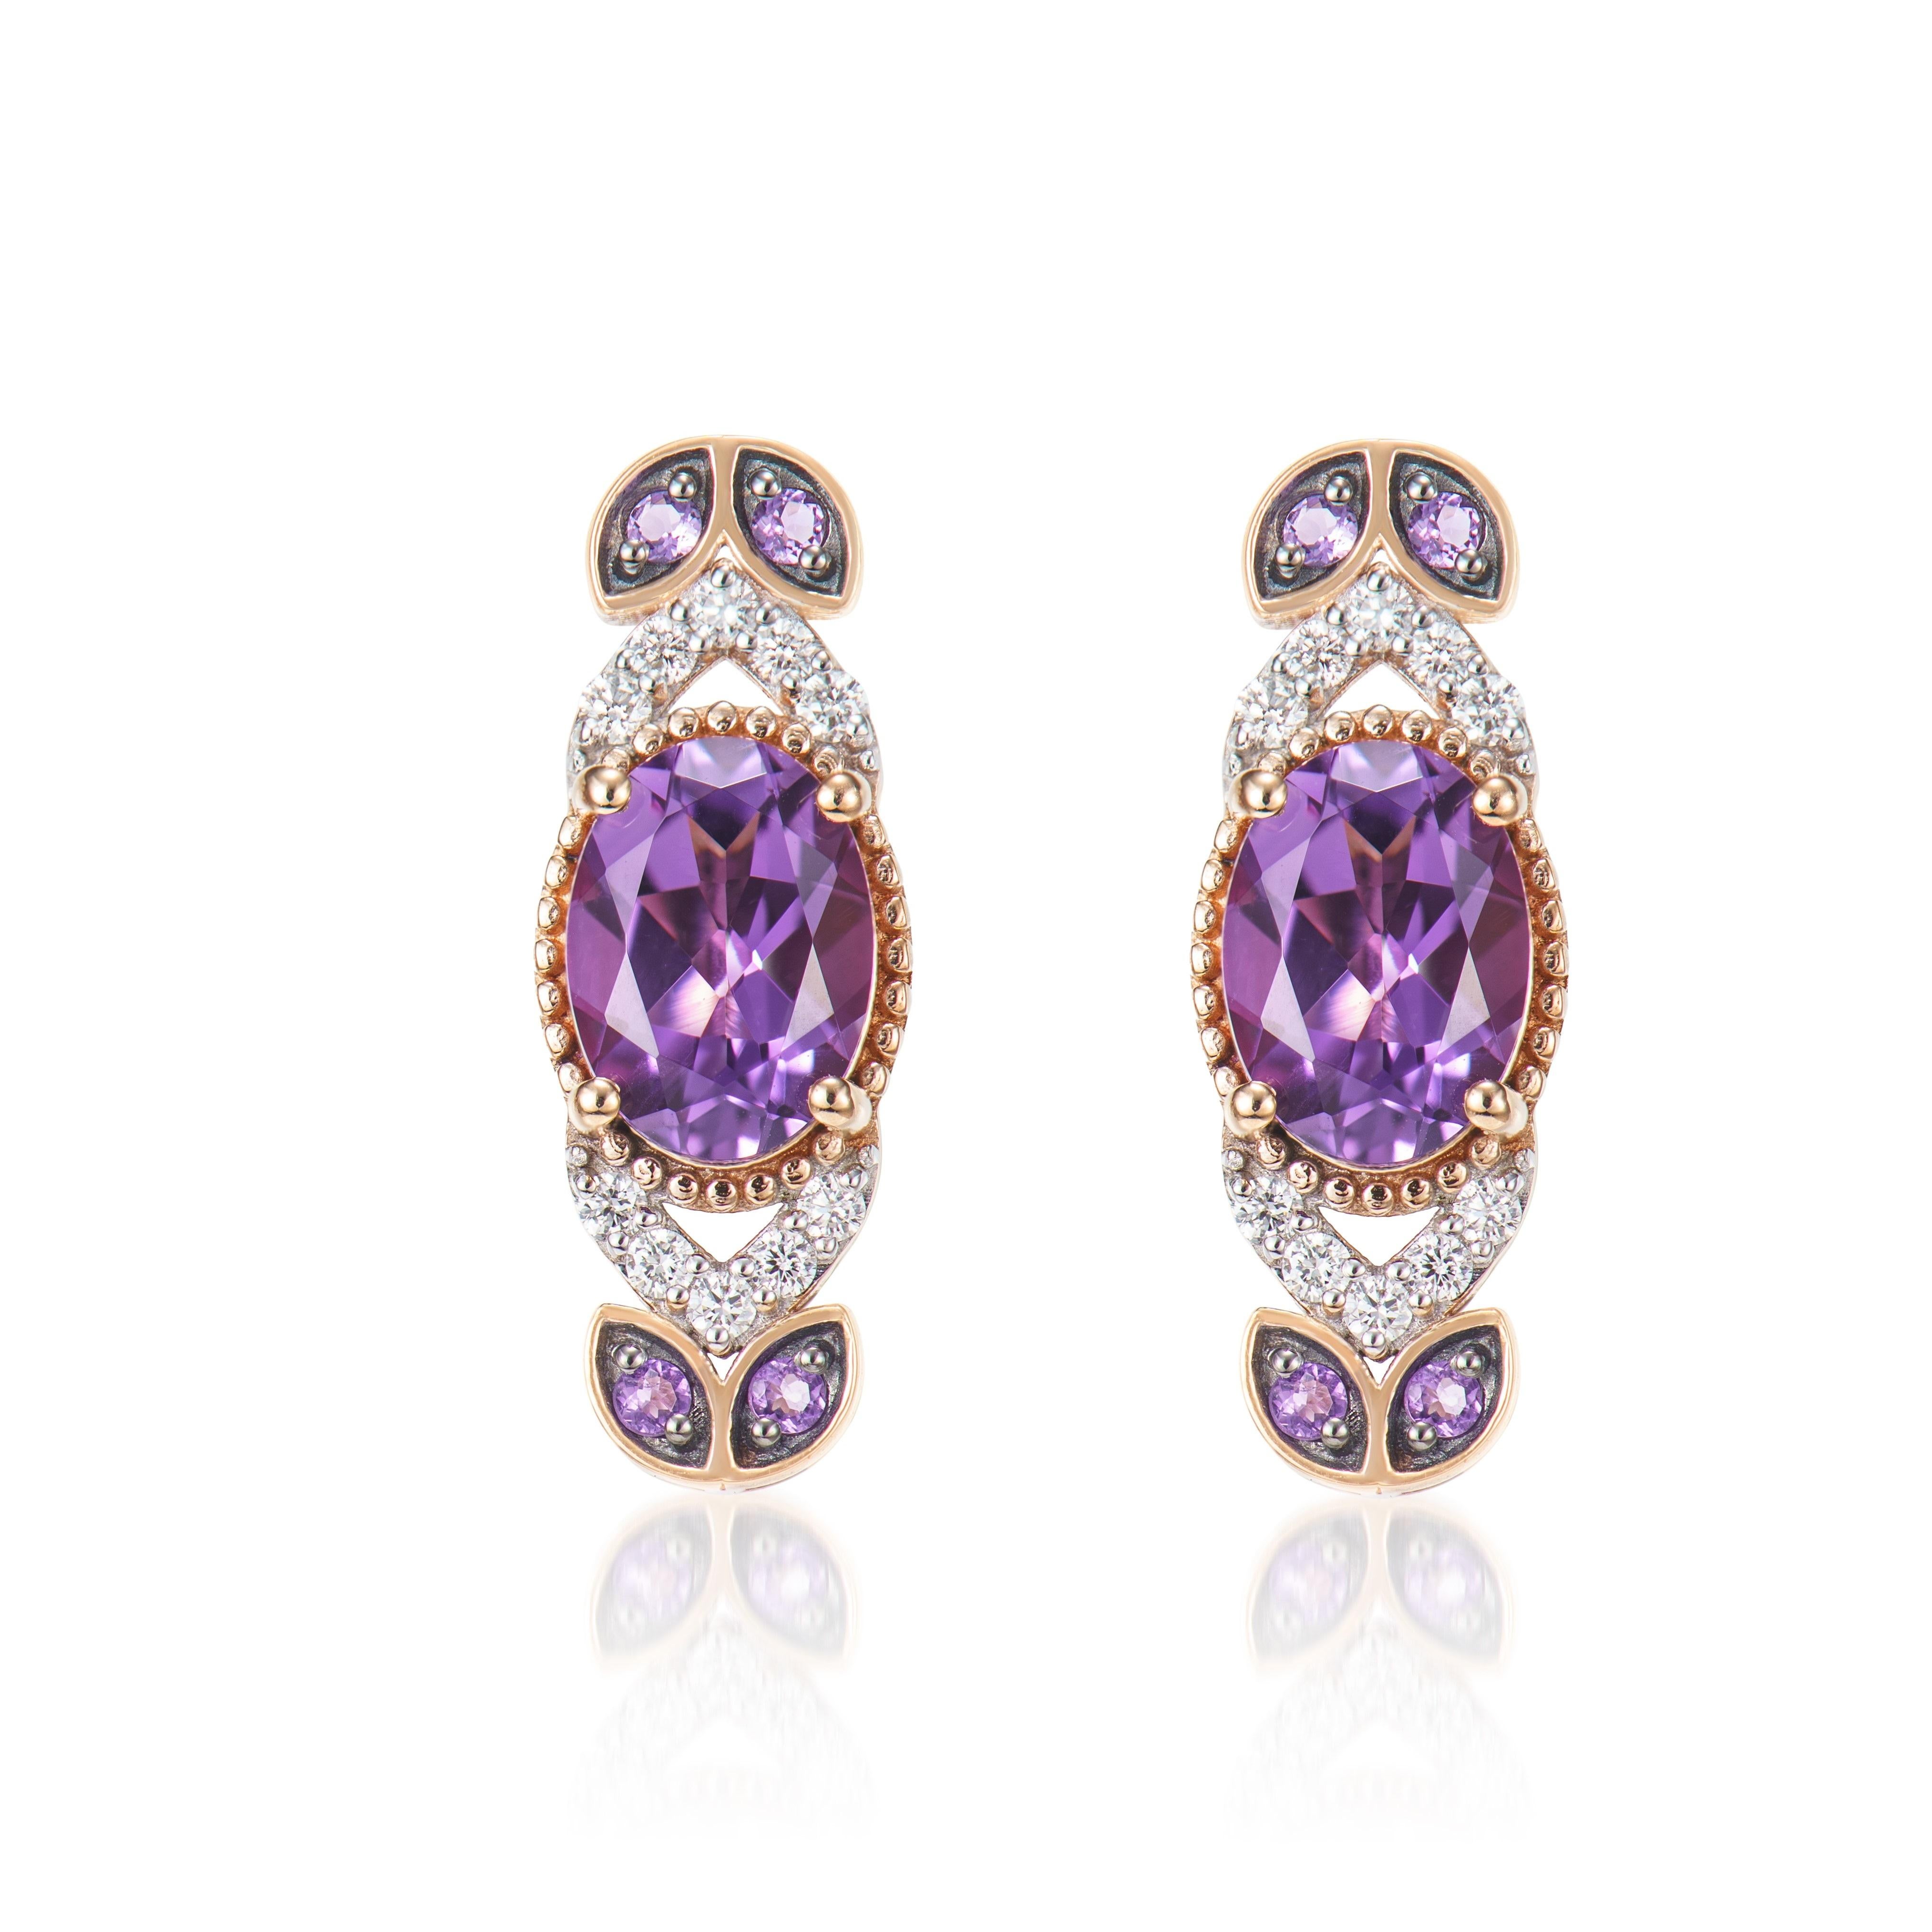 Presented A lovely set of Amethyst for people who value quality and want to wear it to any occasion or celebration. The rose gold Amethyst Stud Earrings adorned with diamonds offer a classic yet elegant appearance.

Amethyst Stud Earrings in 18Karat